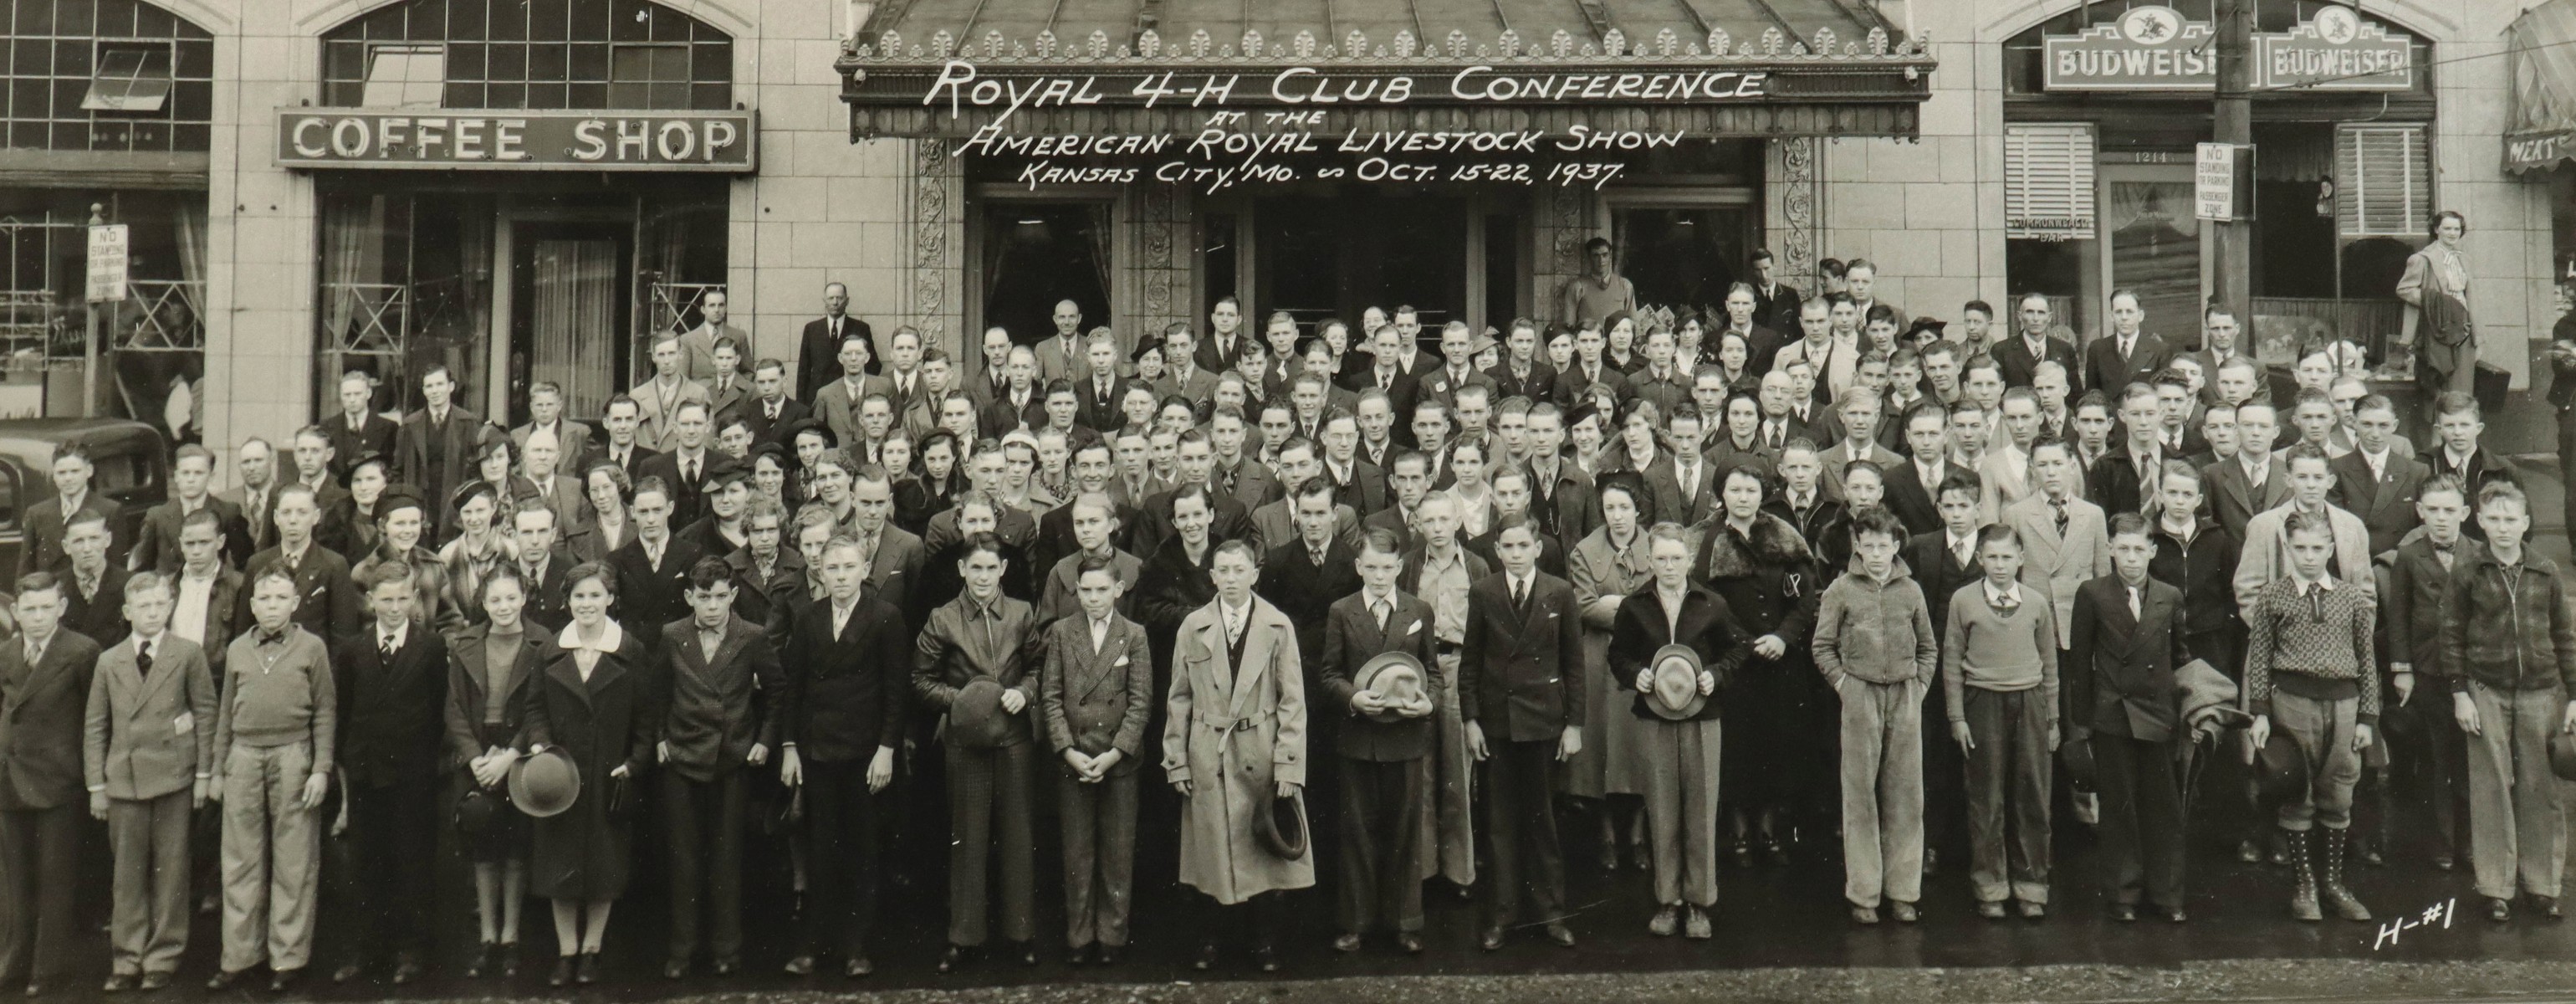 1937 ROYAL 4-H CLUB CONFERENCE PHOTOGRAPH 1937